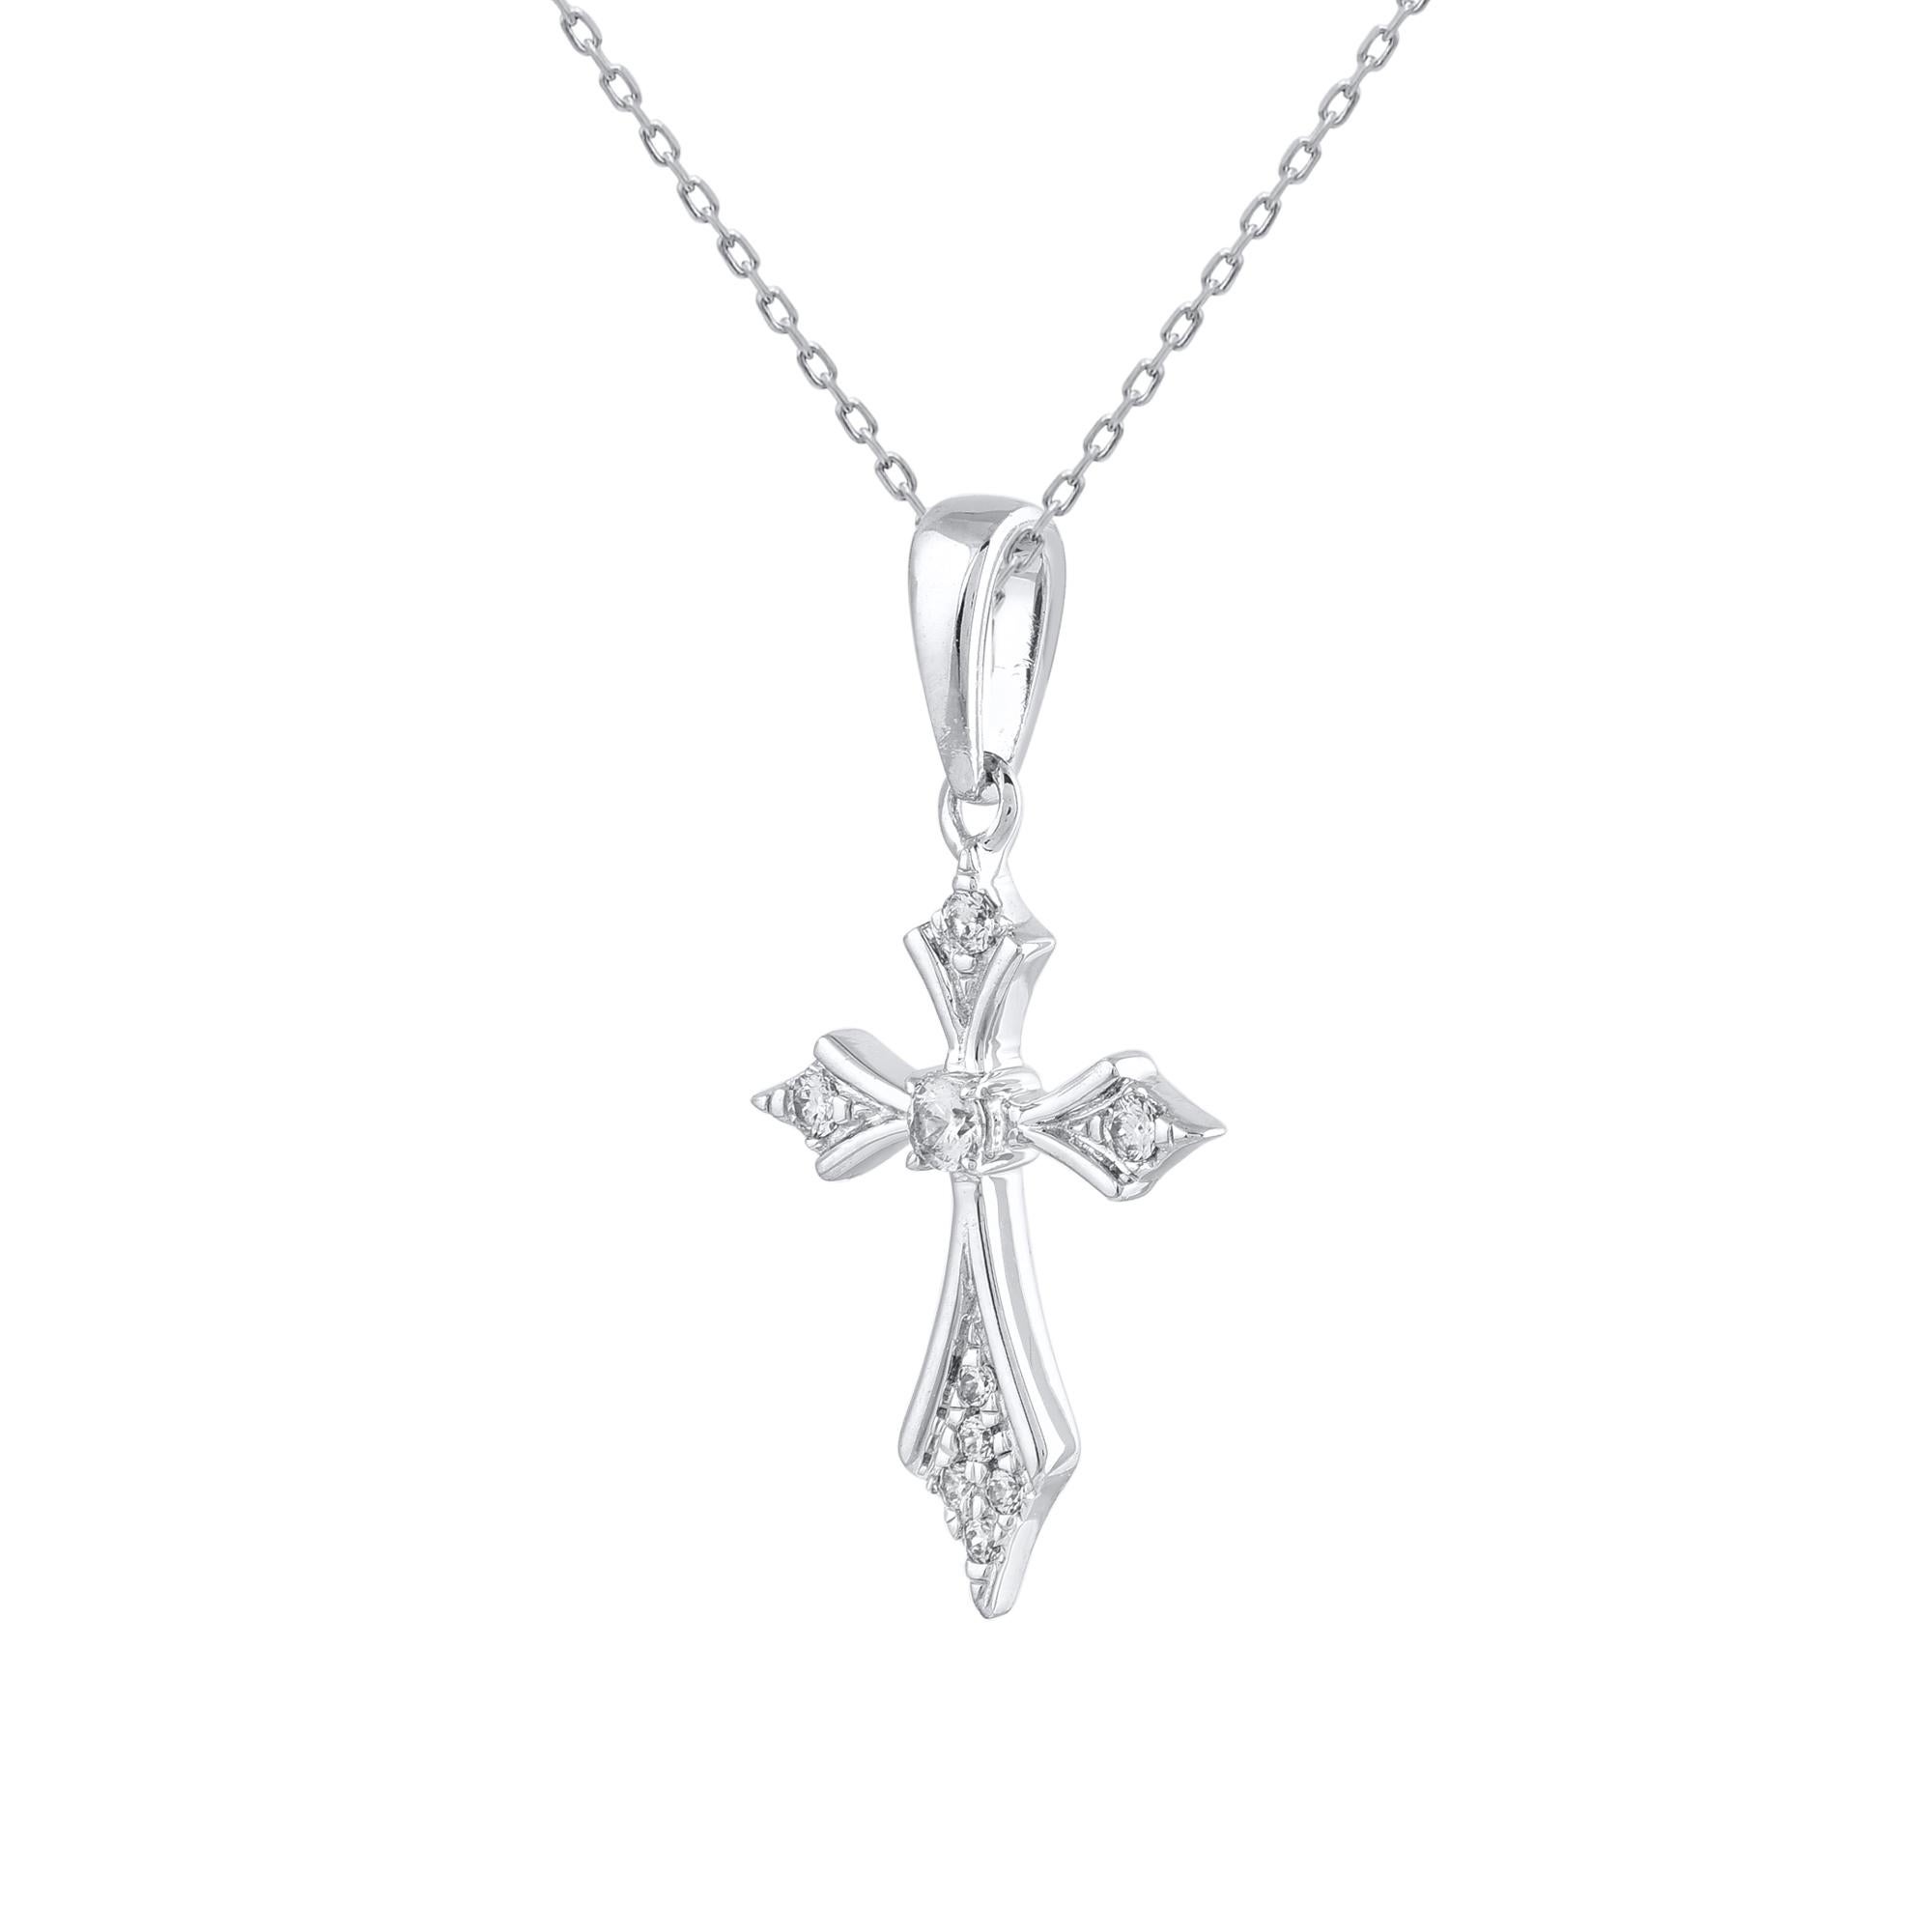 The traditional cross pendant has been given an update with the emphasis on style. Beautifully crafted by our inhouse experts in 18 karat white gold and embellished with 9 single cut & brilliant cut round diamond in prong setting. The total diamond